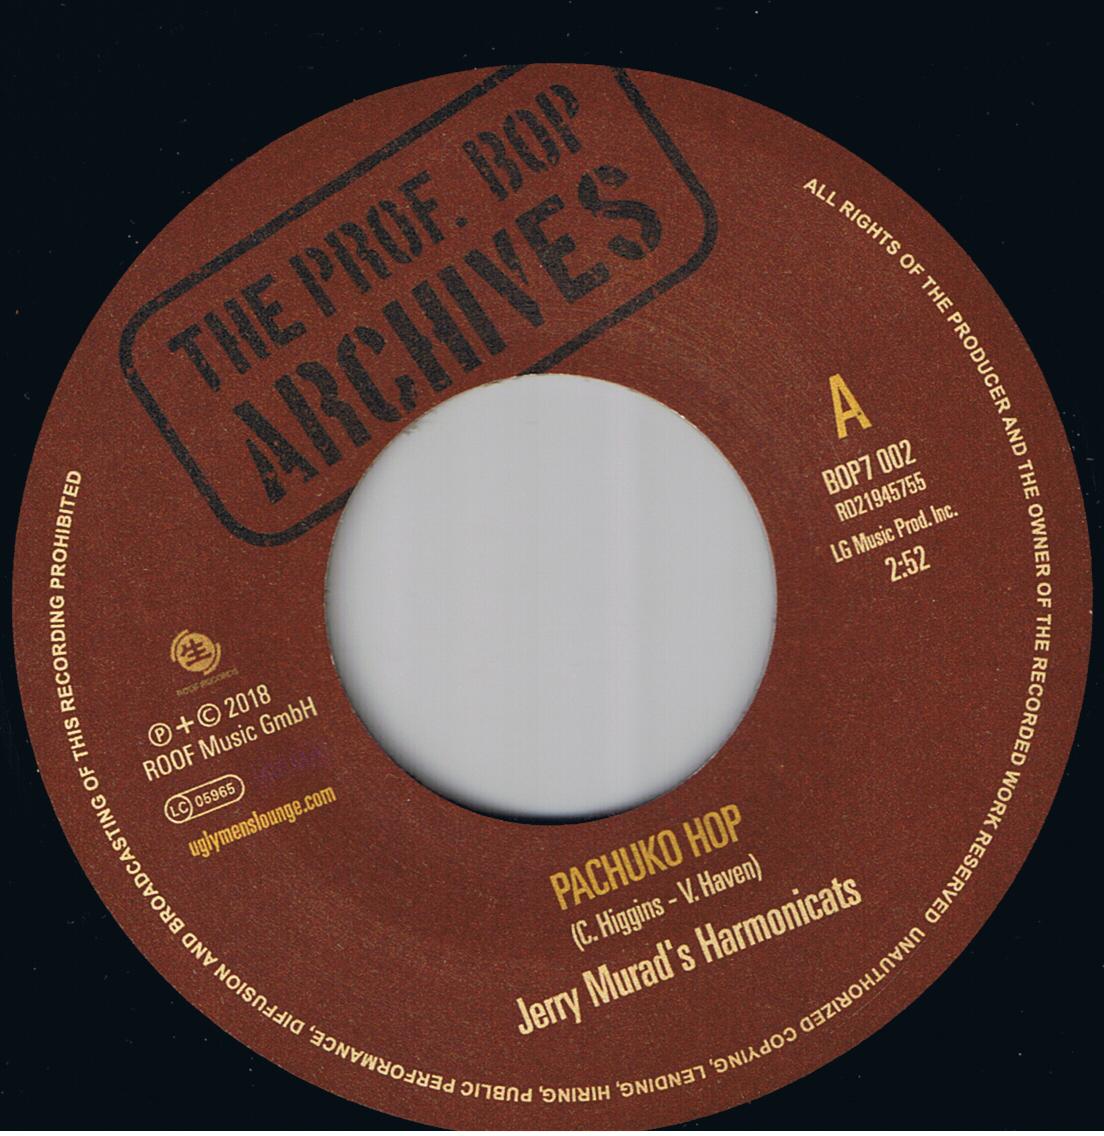 Jerry Murad's Harmonicats - Pachuko Hop / Al Brown & His Tunetoppers - Hit It And Go (7")